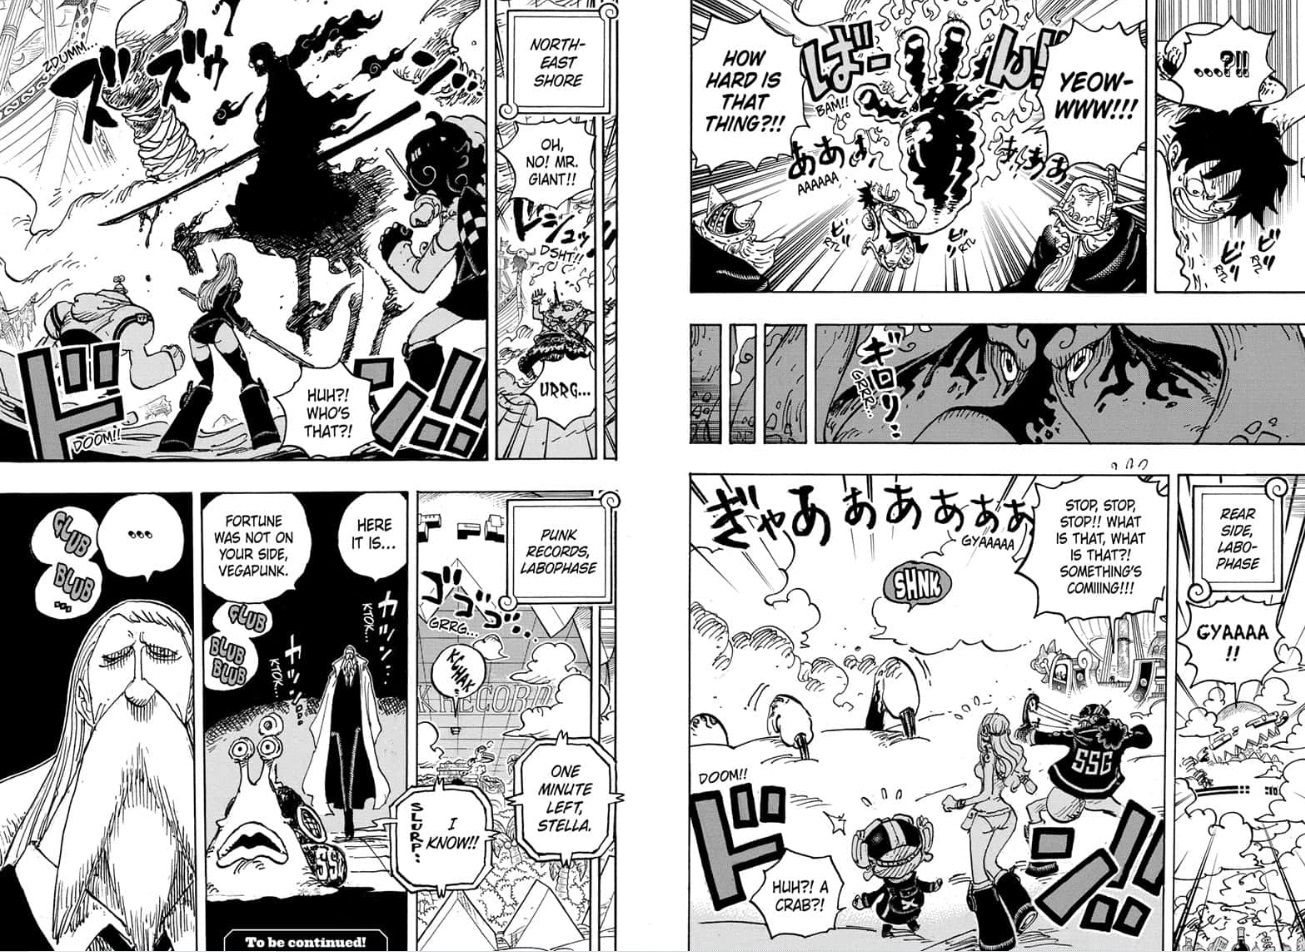 One Piece manga chapter 1112 Mars approaches the transponder snail